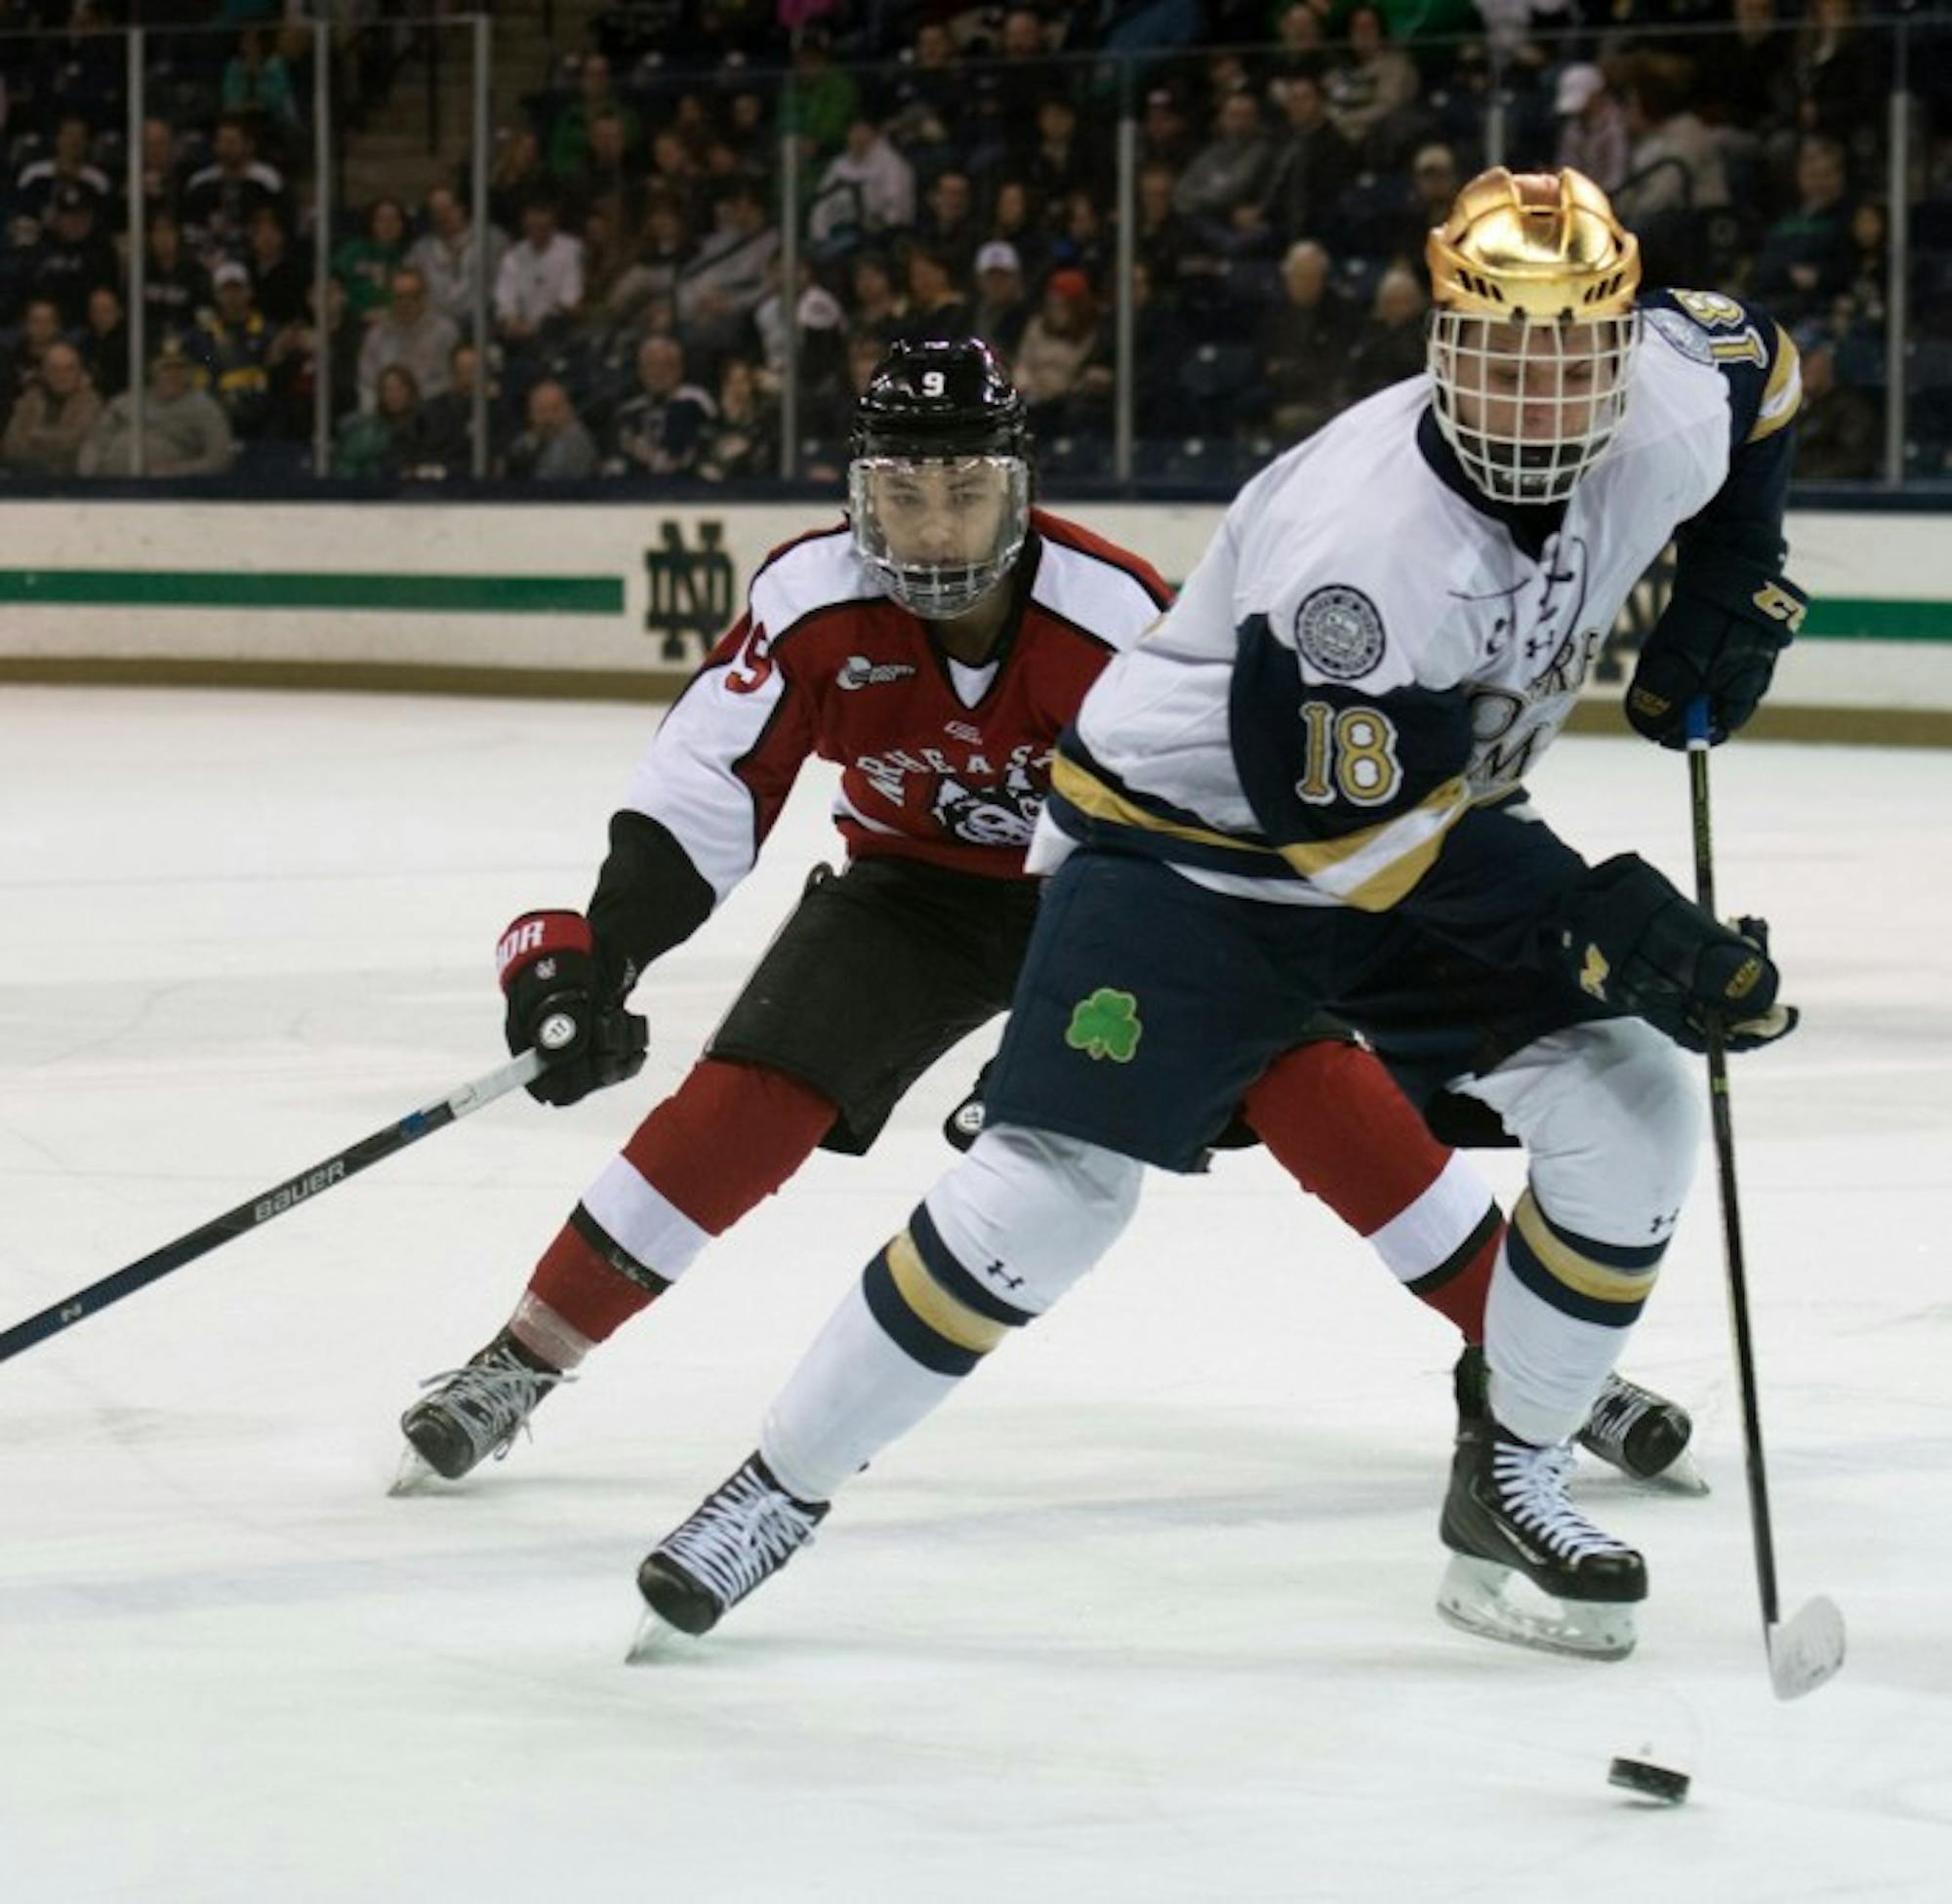 Irish sophomore center Jake Evans skates up the ice during Notre Dame's 6-4 loss to Northeastern on March 12 at Compton Family Ice Arena. The Irish are set to join the Big Ten for hockey starting in the 2017-18 season.